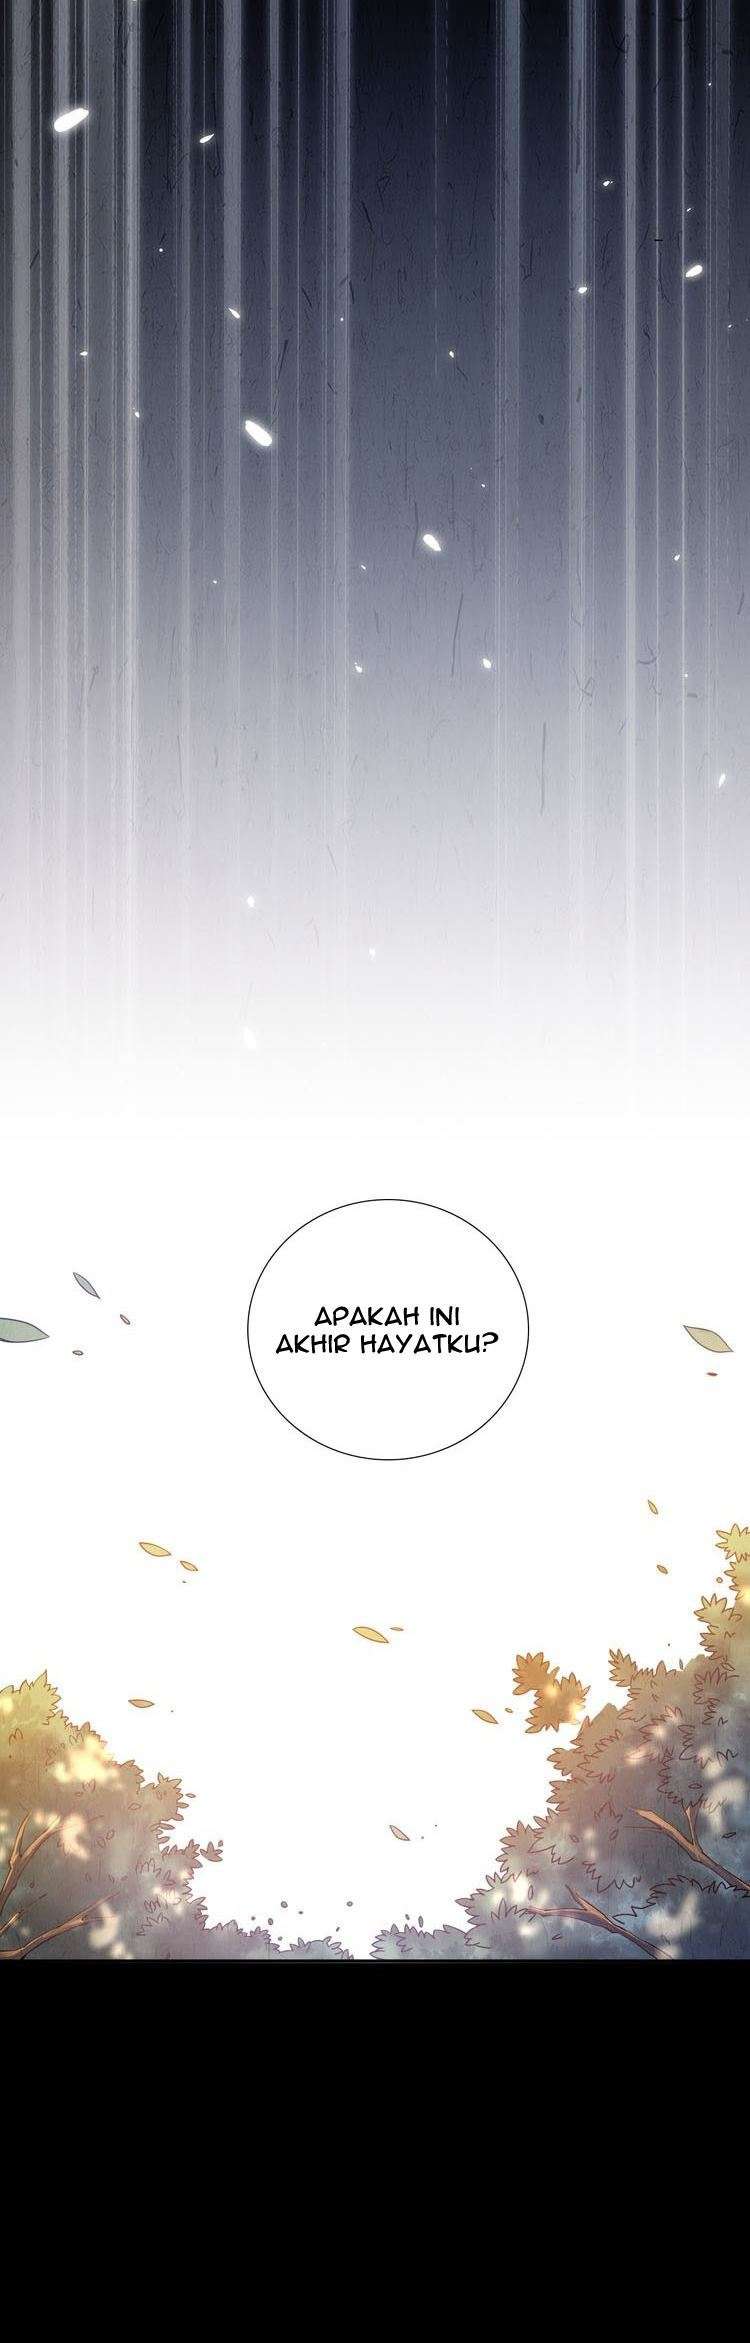 Ultimate Soldier Chapter 89